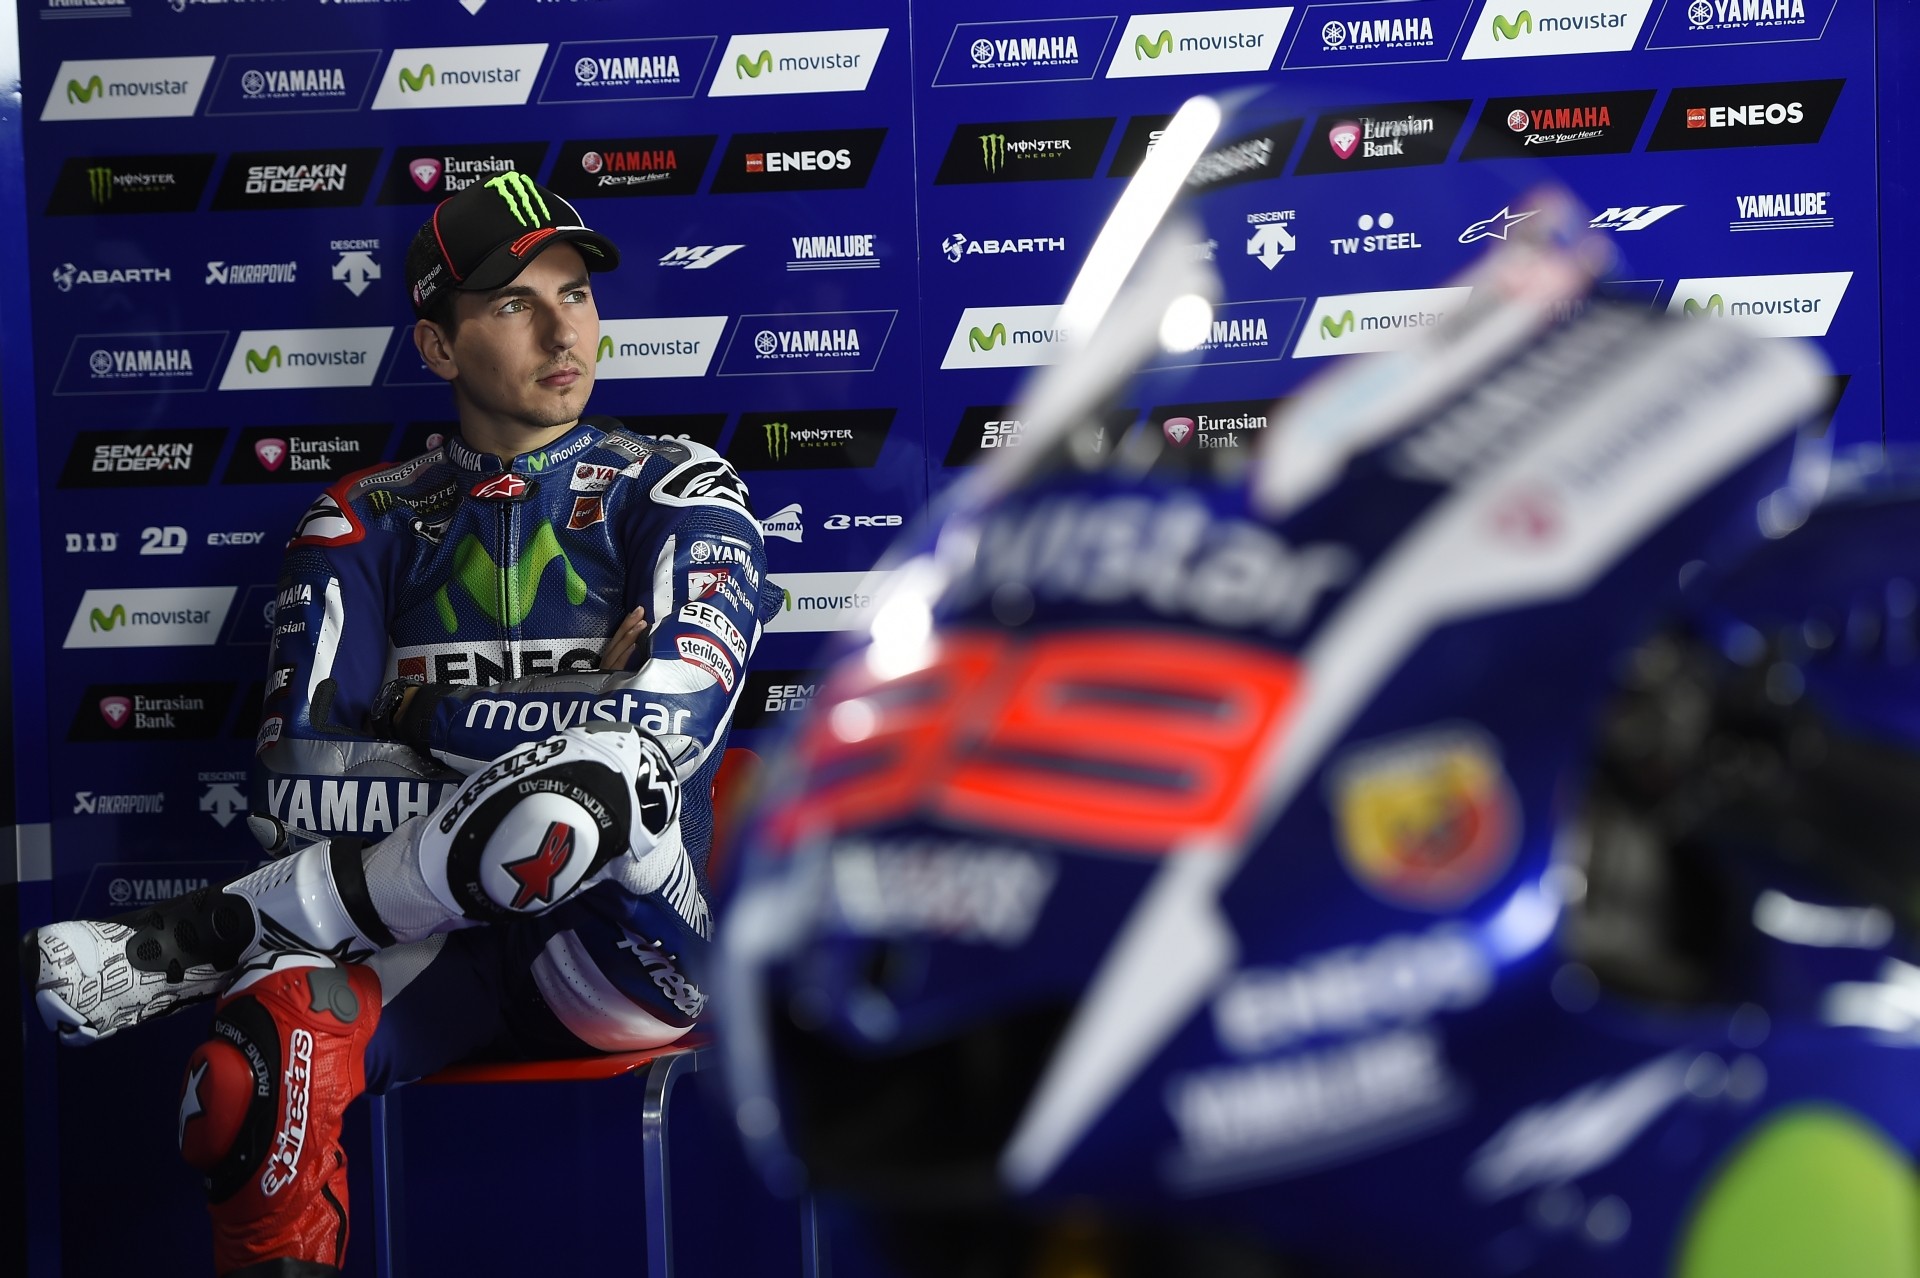 High-Res Photos of the 2015 Yamaha YZR-M1 with Rossi and Lorenzo ...